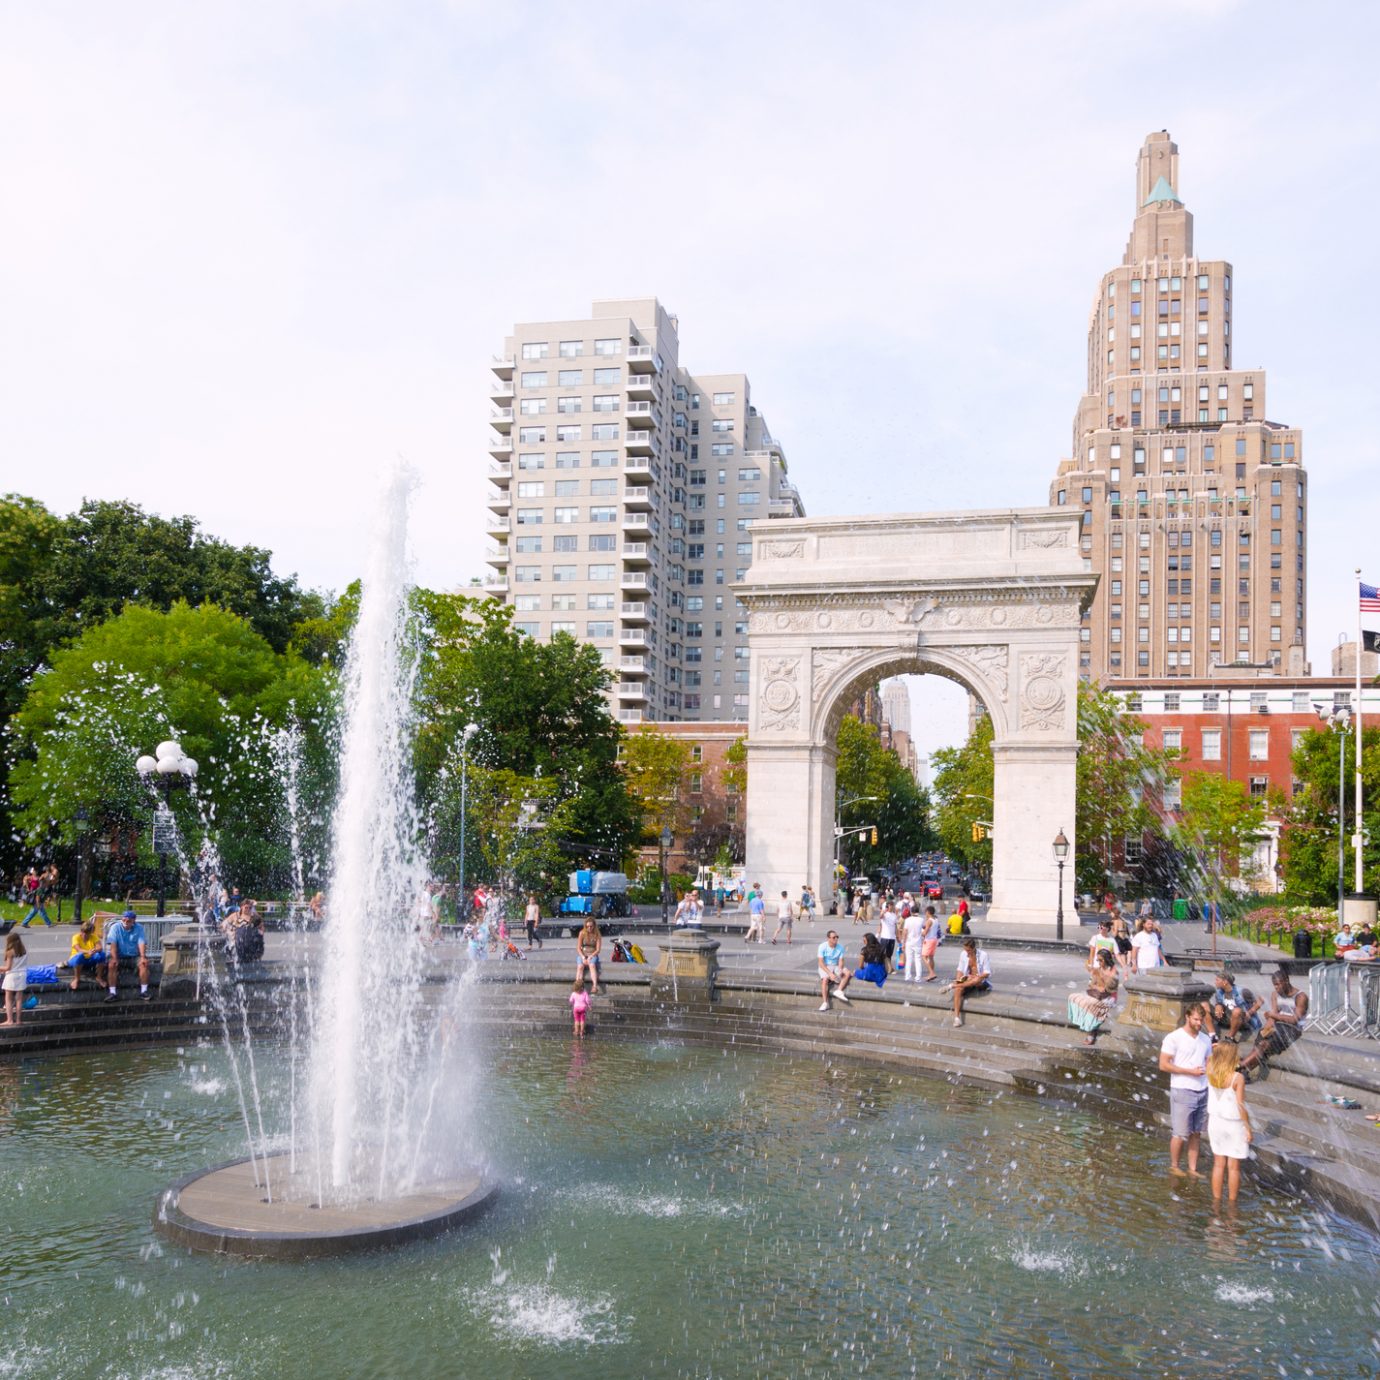 People meander about the fountain at Washington Square Park near the Washington Square Arch at Greenwich Village in the Manhattan borough of New York City.